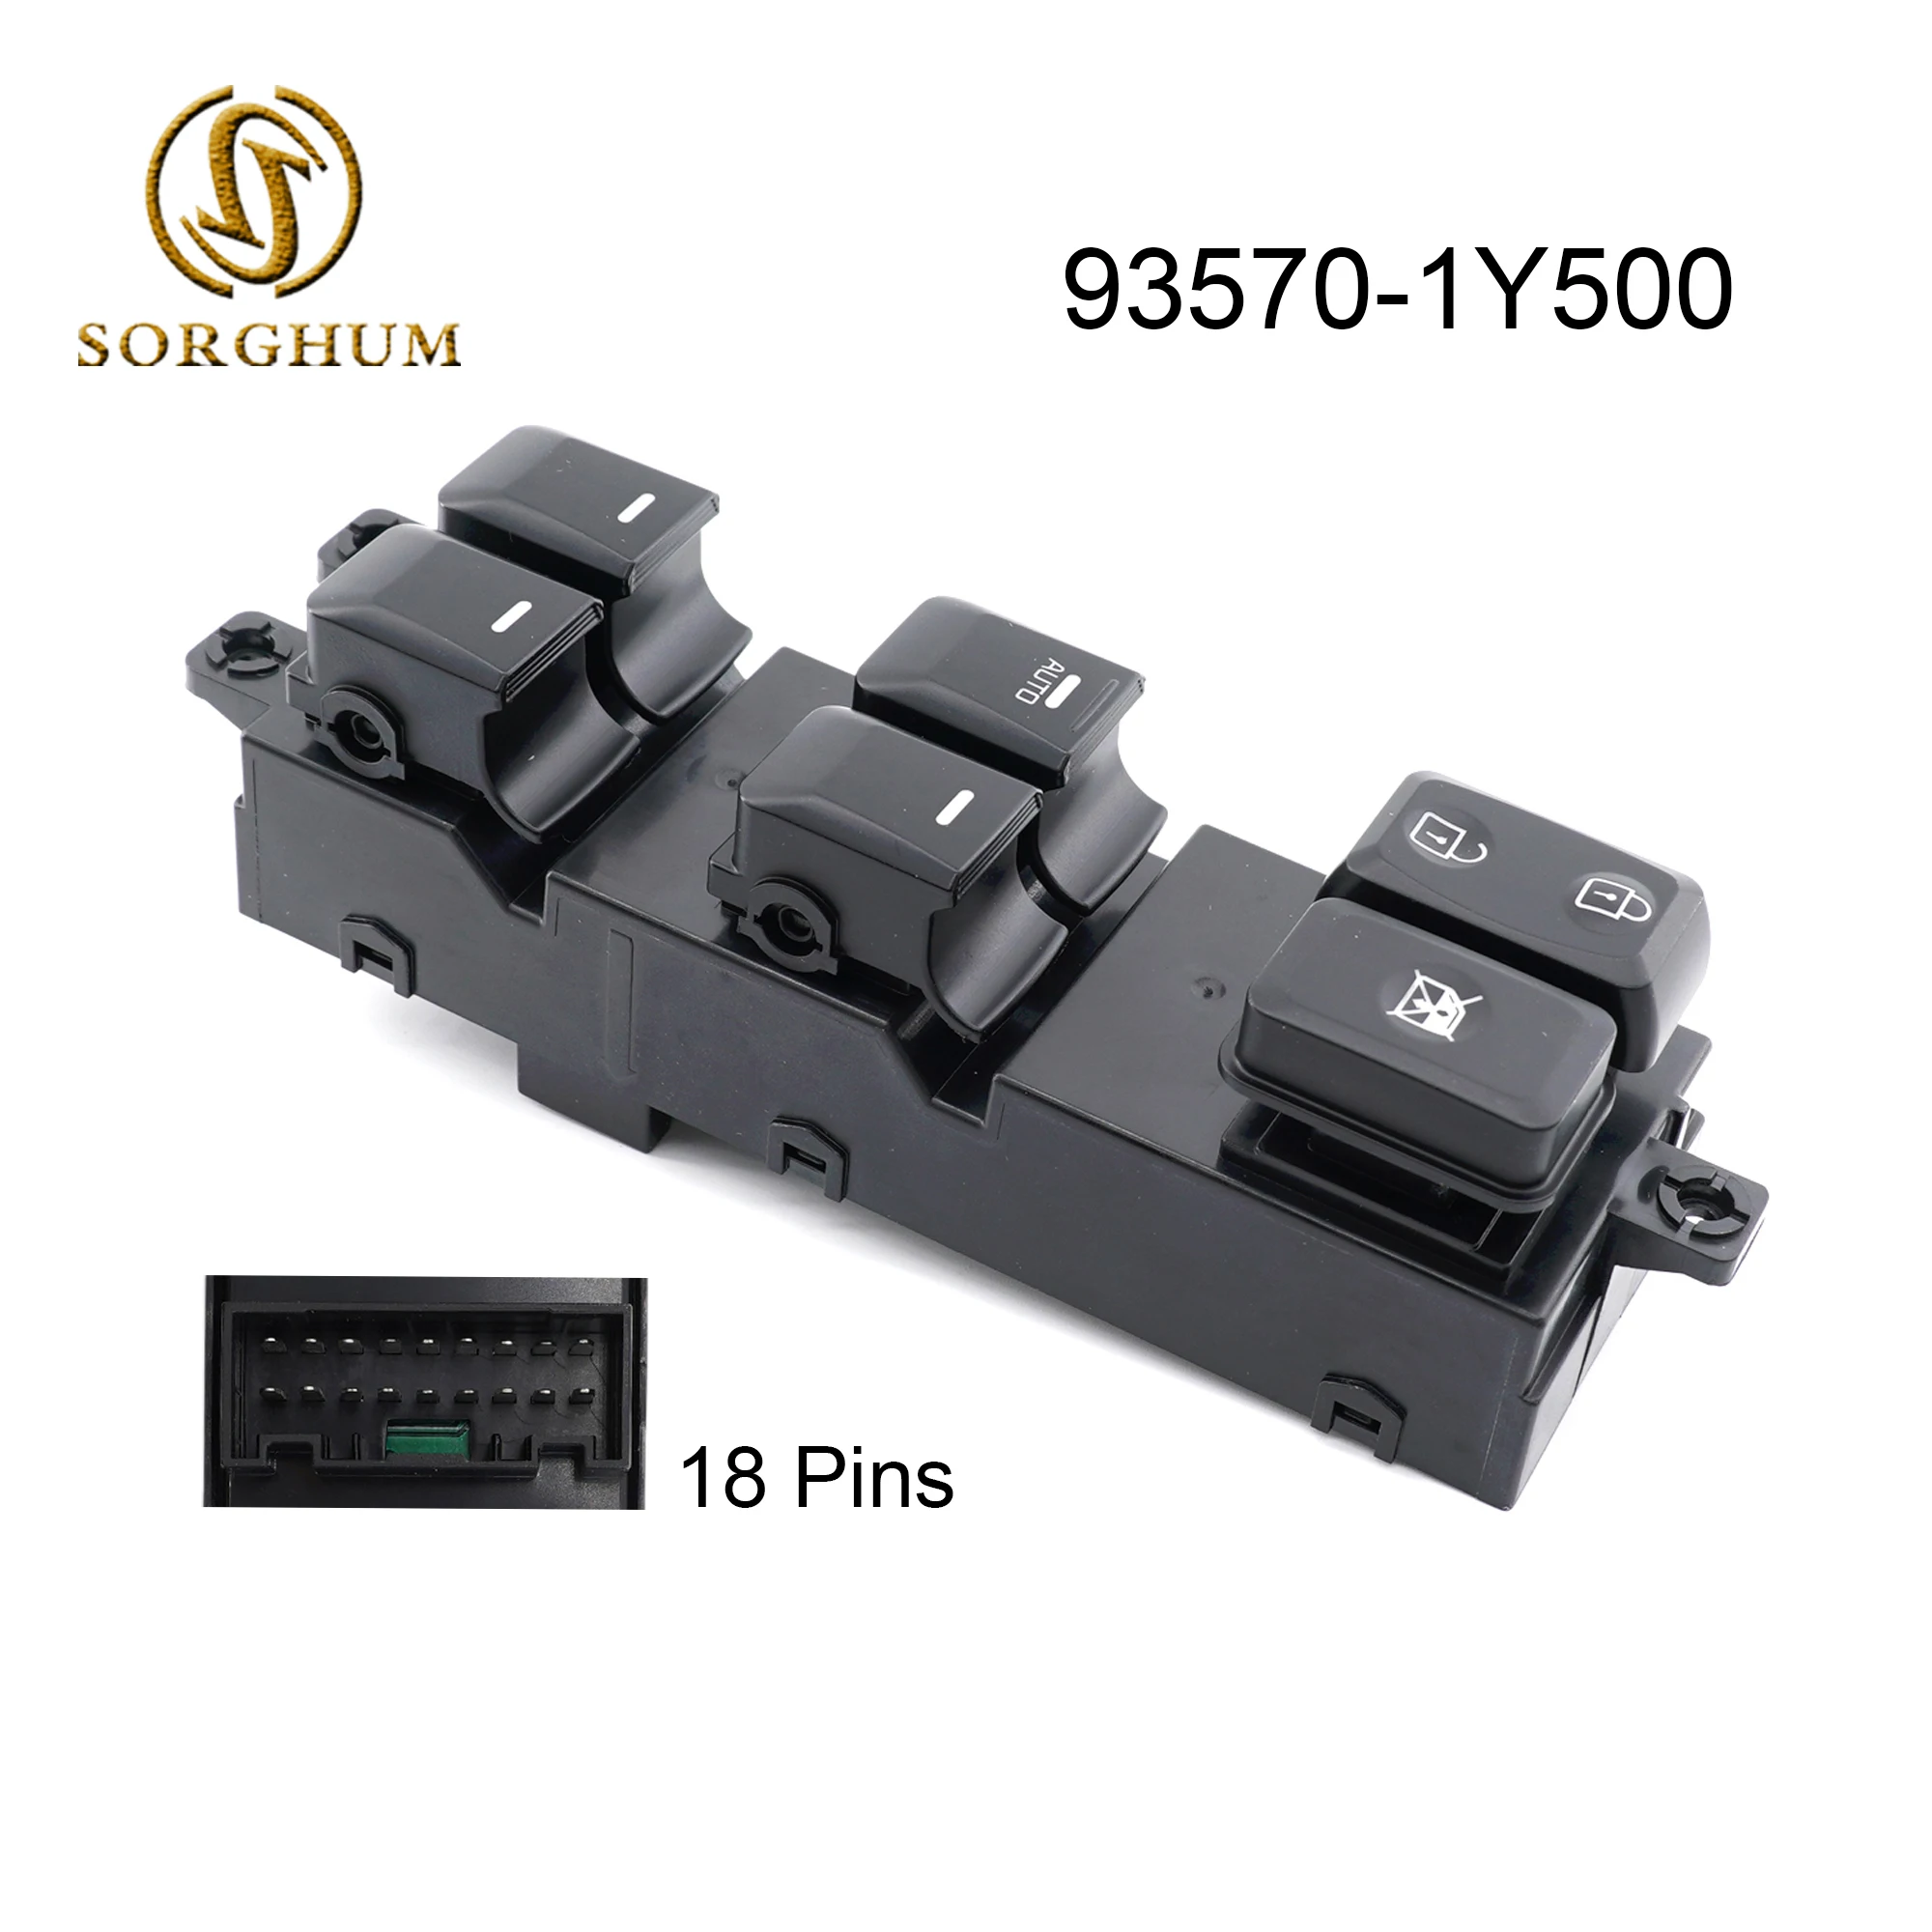 

Sorghum 93570-1Y500 935701Y500 Electric Power Master Window Lifter Control Switch For Kia Morning Picanto TA 2011 2017 Car Parts